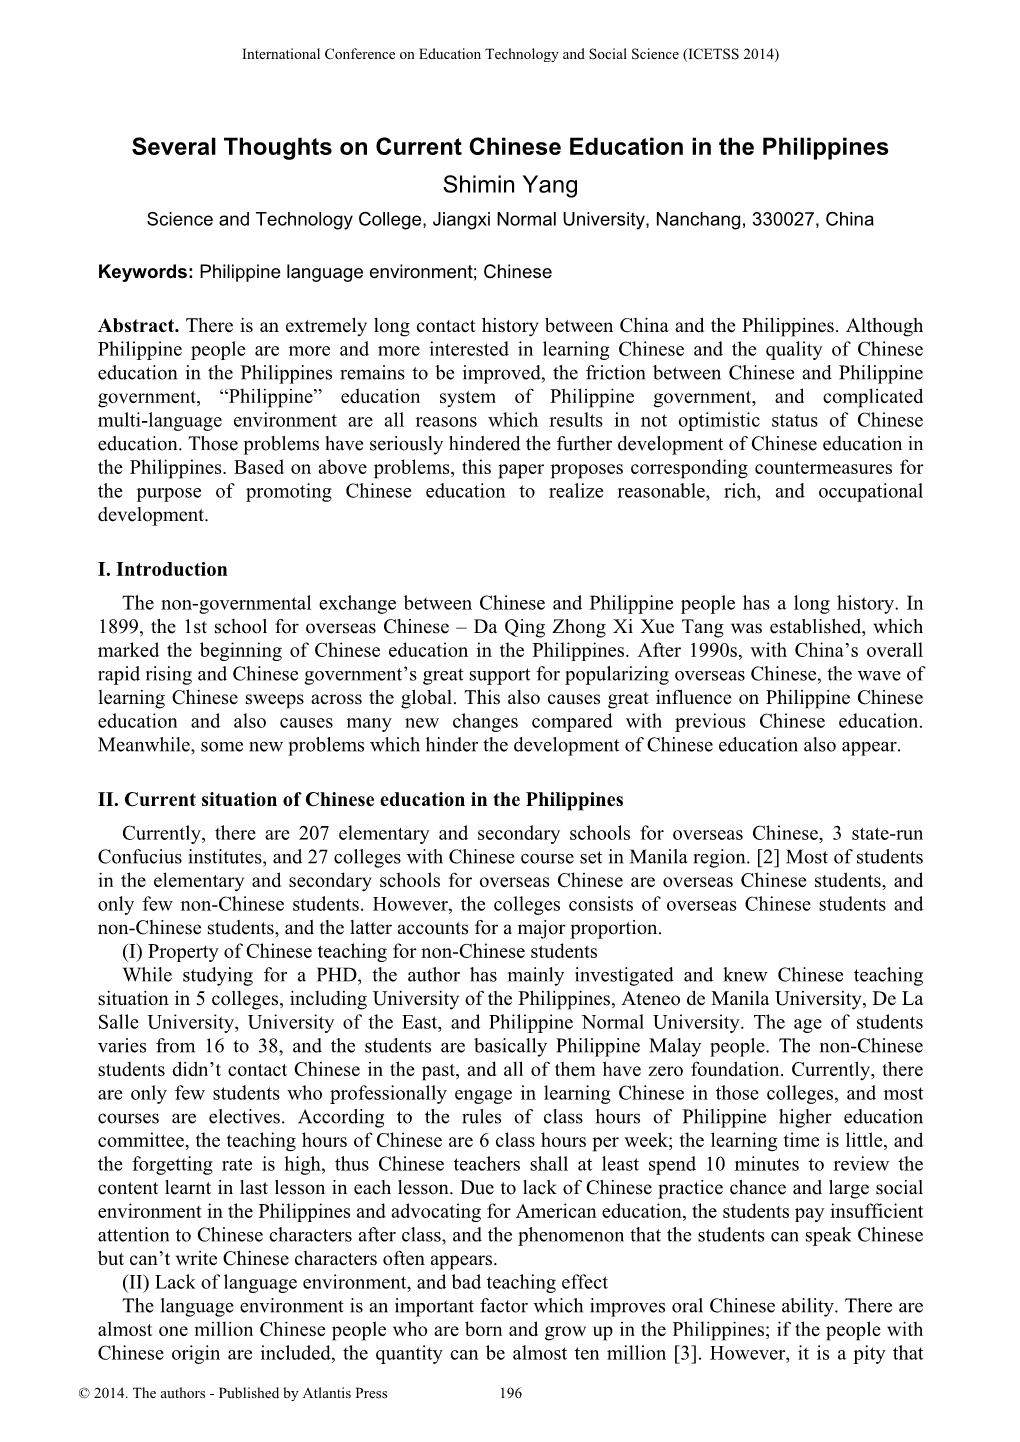 Several Thoughts on Current Chinese Education in the Philippines Shimin Yang Science and Technology College, Jiangxi Normal University, Nanchang, 330027, China